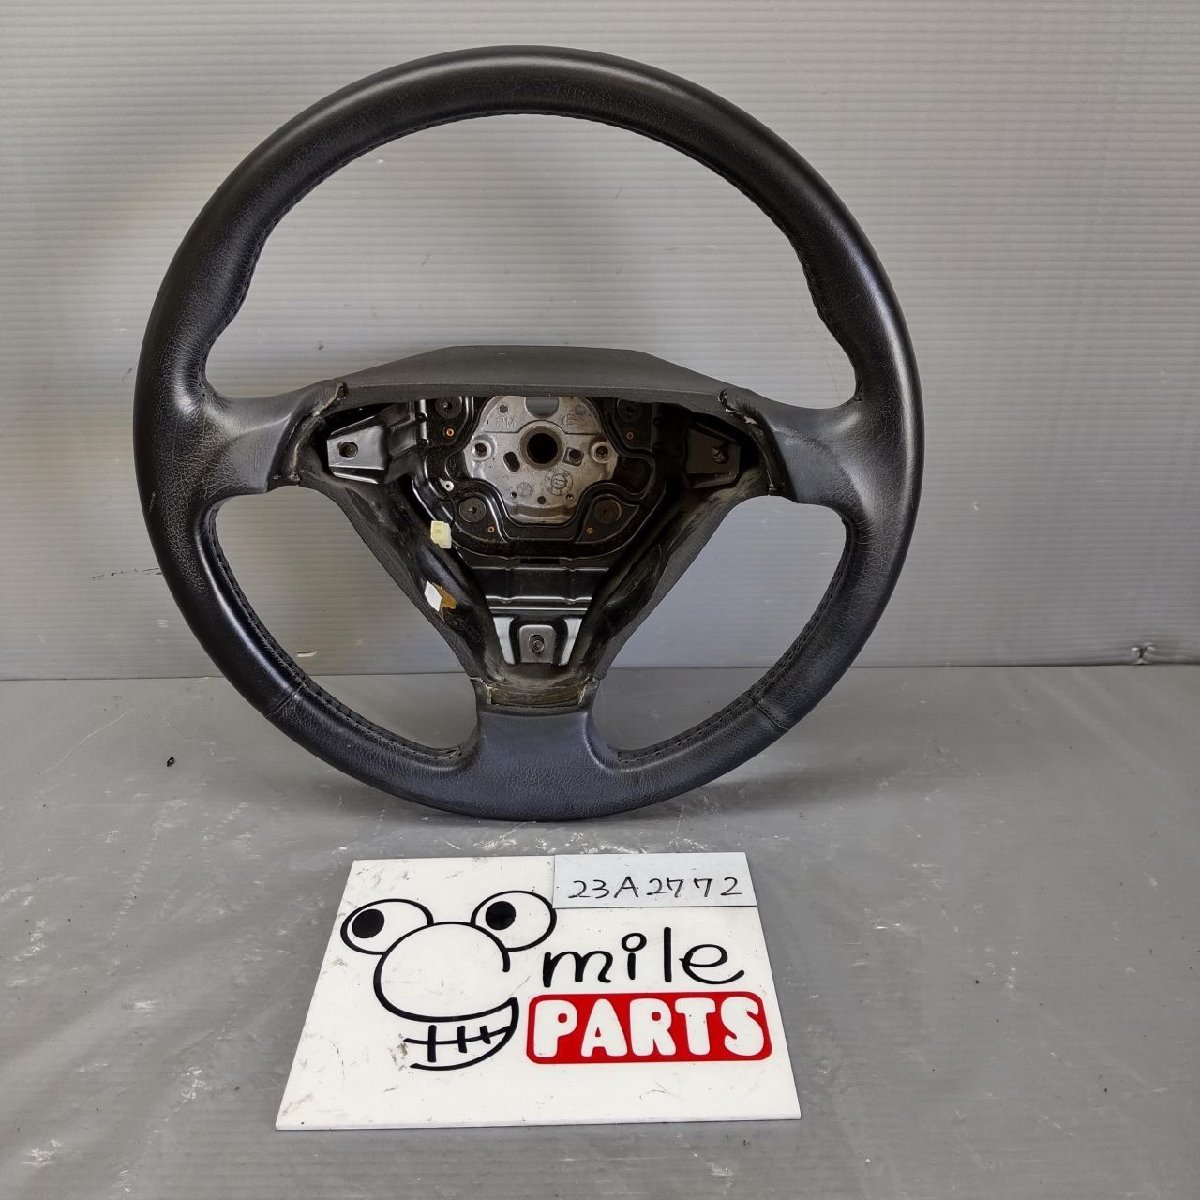 91620S Alpha Spider original steering wheel steering wheel 1D3-24-1/23A2772* including in a package un- possible 